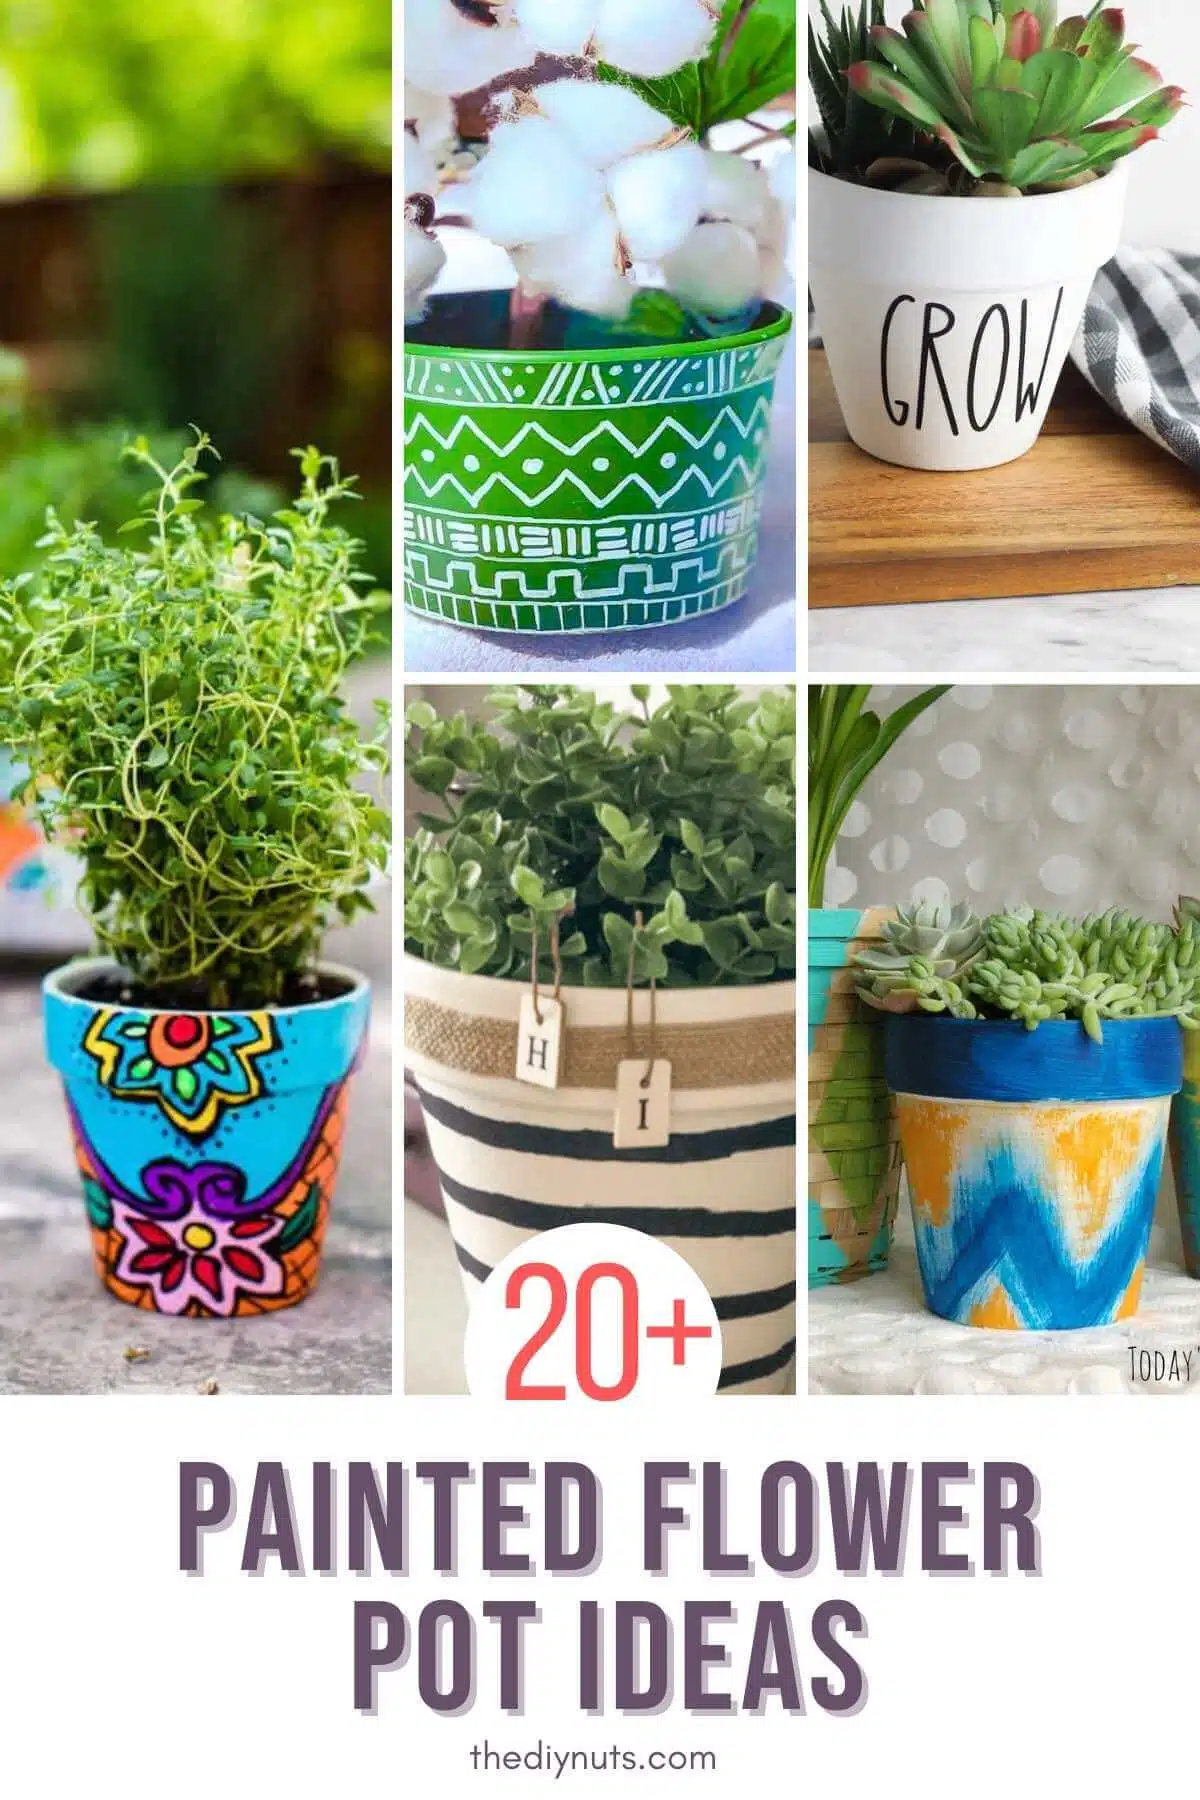 17 painted flower pot ideas with different images of painted flower pots.